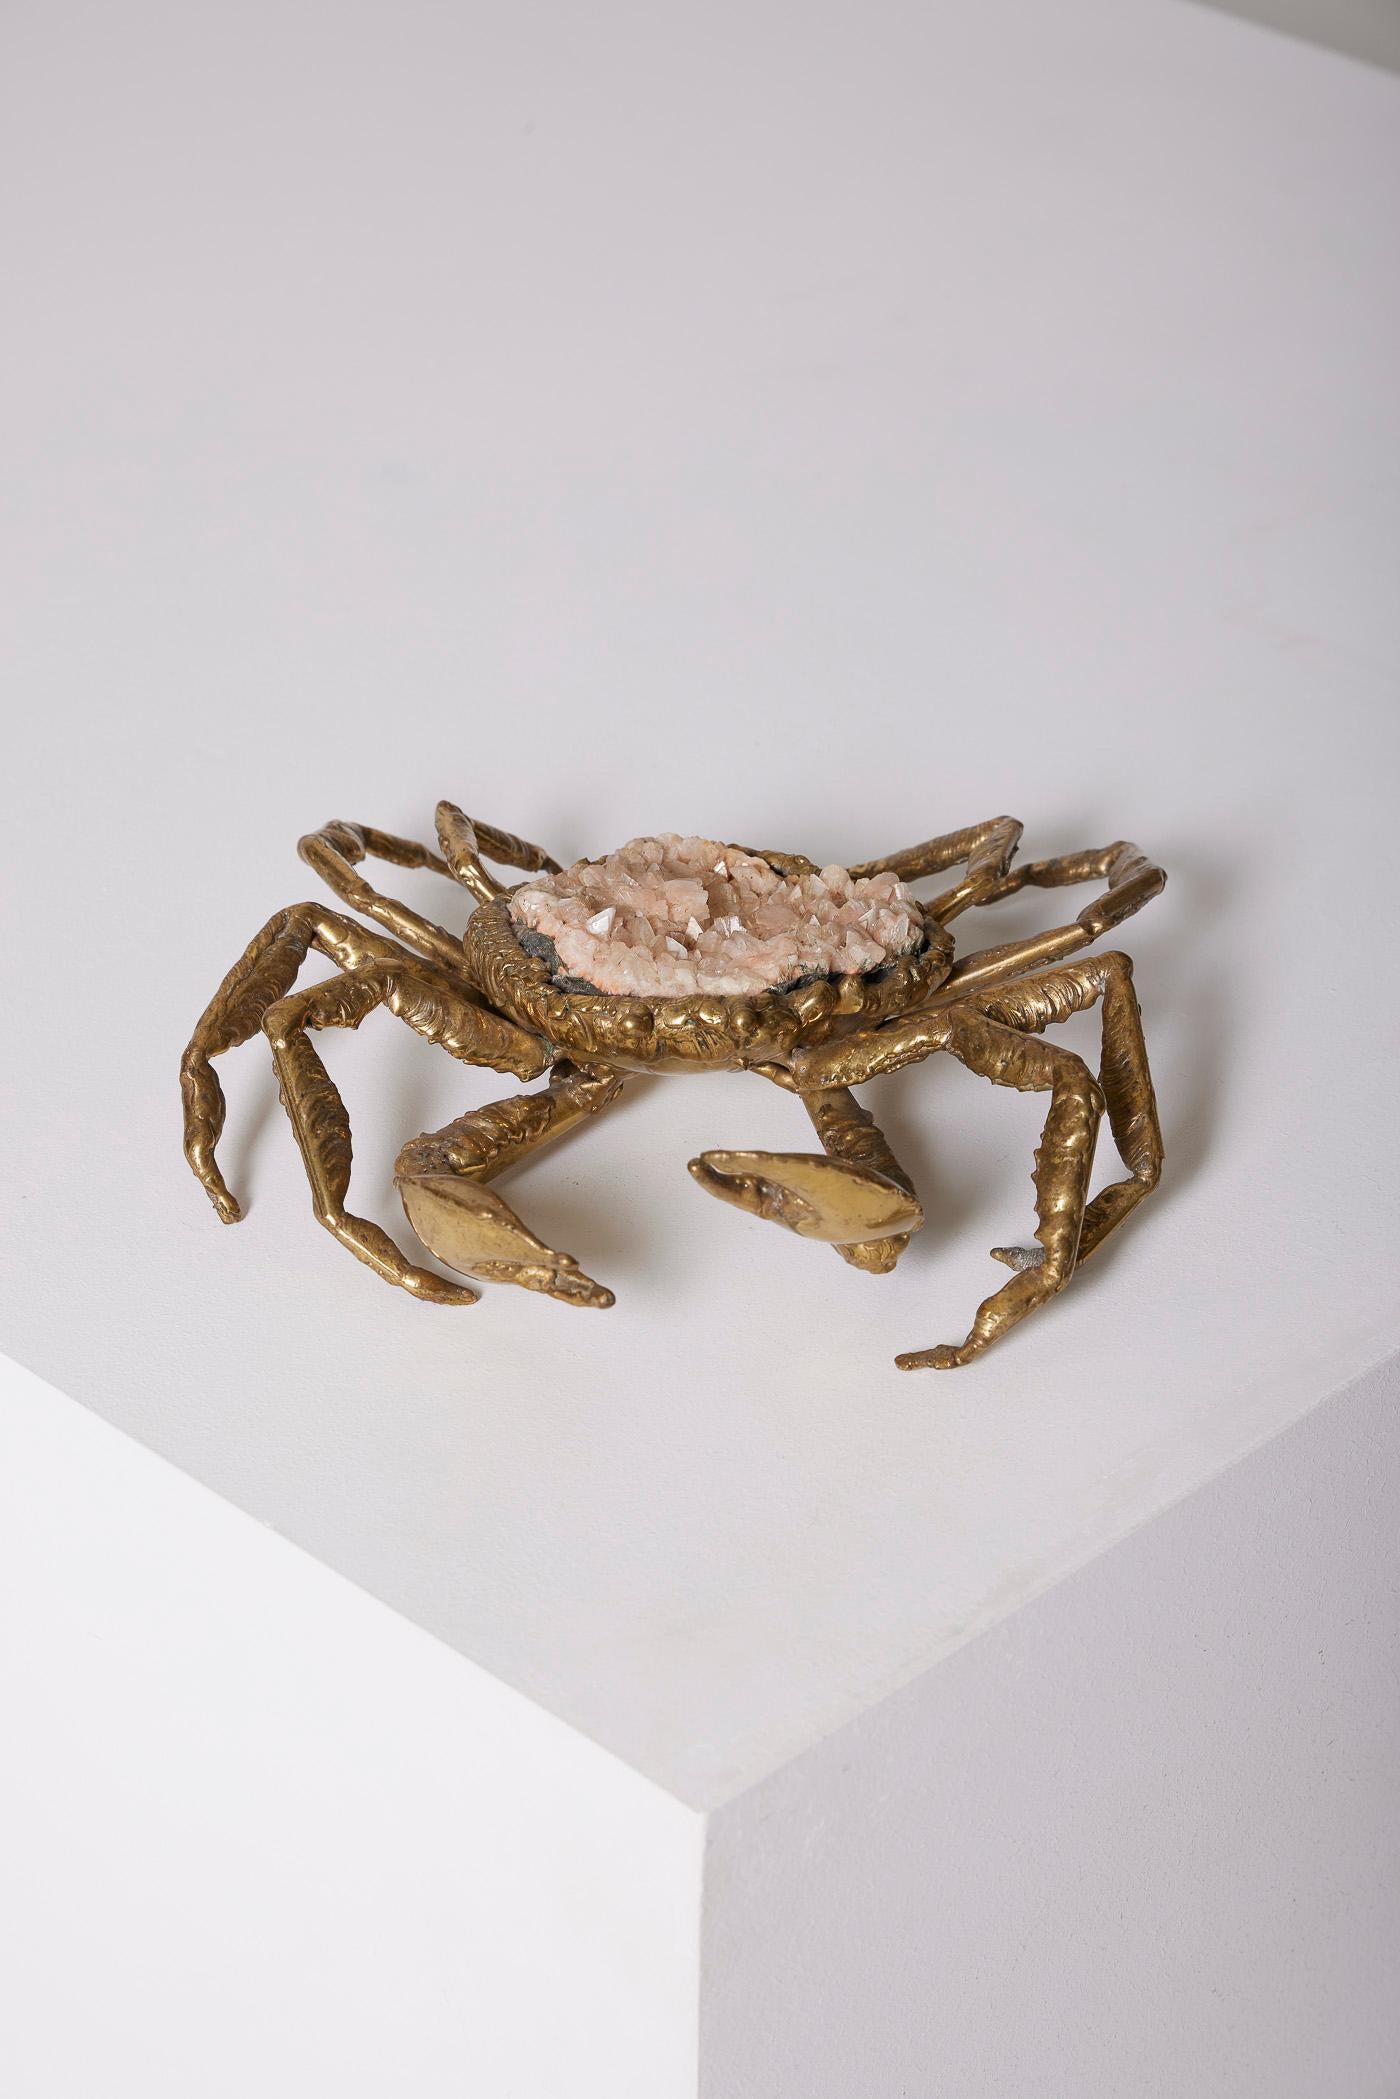 Sculpture in brass and rose quartz by designers Isabelle and Richard Faure, from the 1970s. Signed sculpture on one of the sea spider's claws. In perfect condition.
DV495